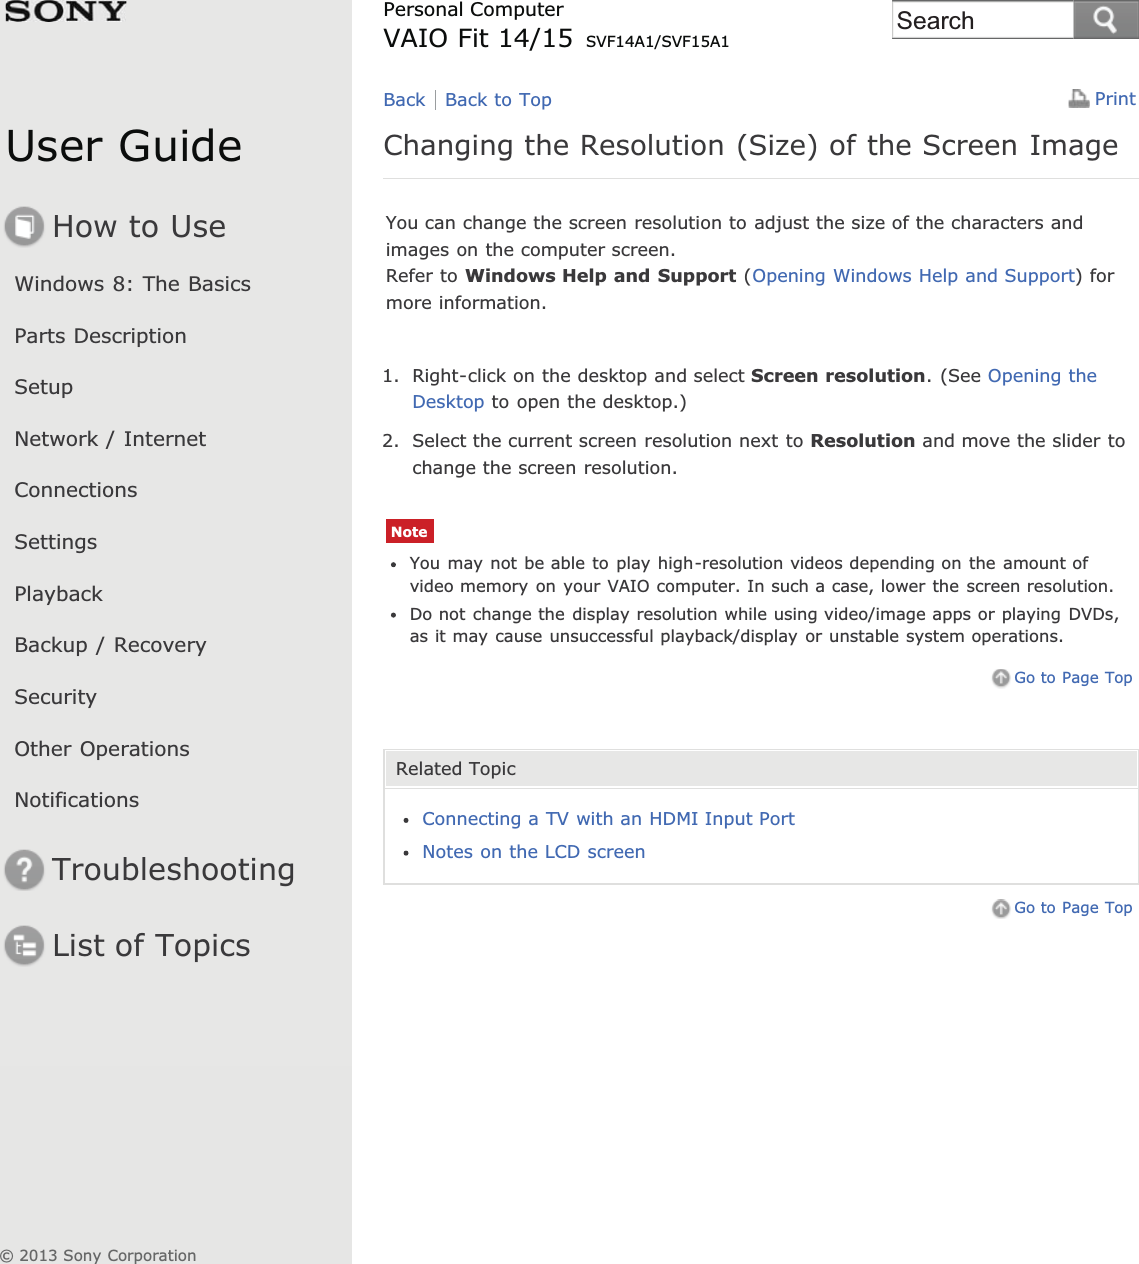 User GuideHow to UseWindows 8: The BasicsParts DescriptionSetupNetwork / InternetConnectionsSettingsPlaybackBackup / RecoverySecurityOther OperationsNotificationsTroubleshootingList of TopicsPrintPersonal ComputerVAIO Fit 14/15 SVF14A1/SVF15A1Changing the Resolution (Size) of the Screen ImageYou can change the screen resolution to adjust the size of the characters andimages on the computer screen.Refer to Windows Help and Support (Opening Windows Help and Support) formore information.1. Right-click on the desktop and select Screen resolution. (See Opening theDesktop to open the desktop.)2. Select the current screen resolution next to Resolution and move the slider tochange the screen resolution.NoteYou may not be able to play high-resolution videos depending on the amount ofvideo memory on your VAIO computer. In such a case, lower the screen resolution.Do not change the display resolution while using video/image apps or playing DVDs,as it may cause unsuccessful playback/display or unstable system operations.Go to Page TopRelated TopicConnecting a TV with an HDMI Input PortNotes on the LCD screenGo to Page TopBack Back to Top© 2013 Sony CorporationSearch